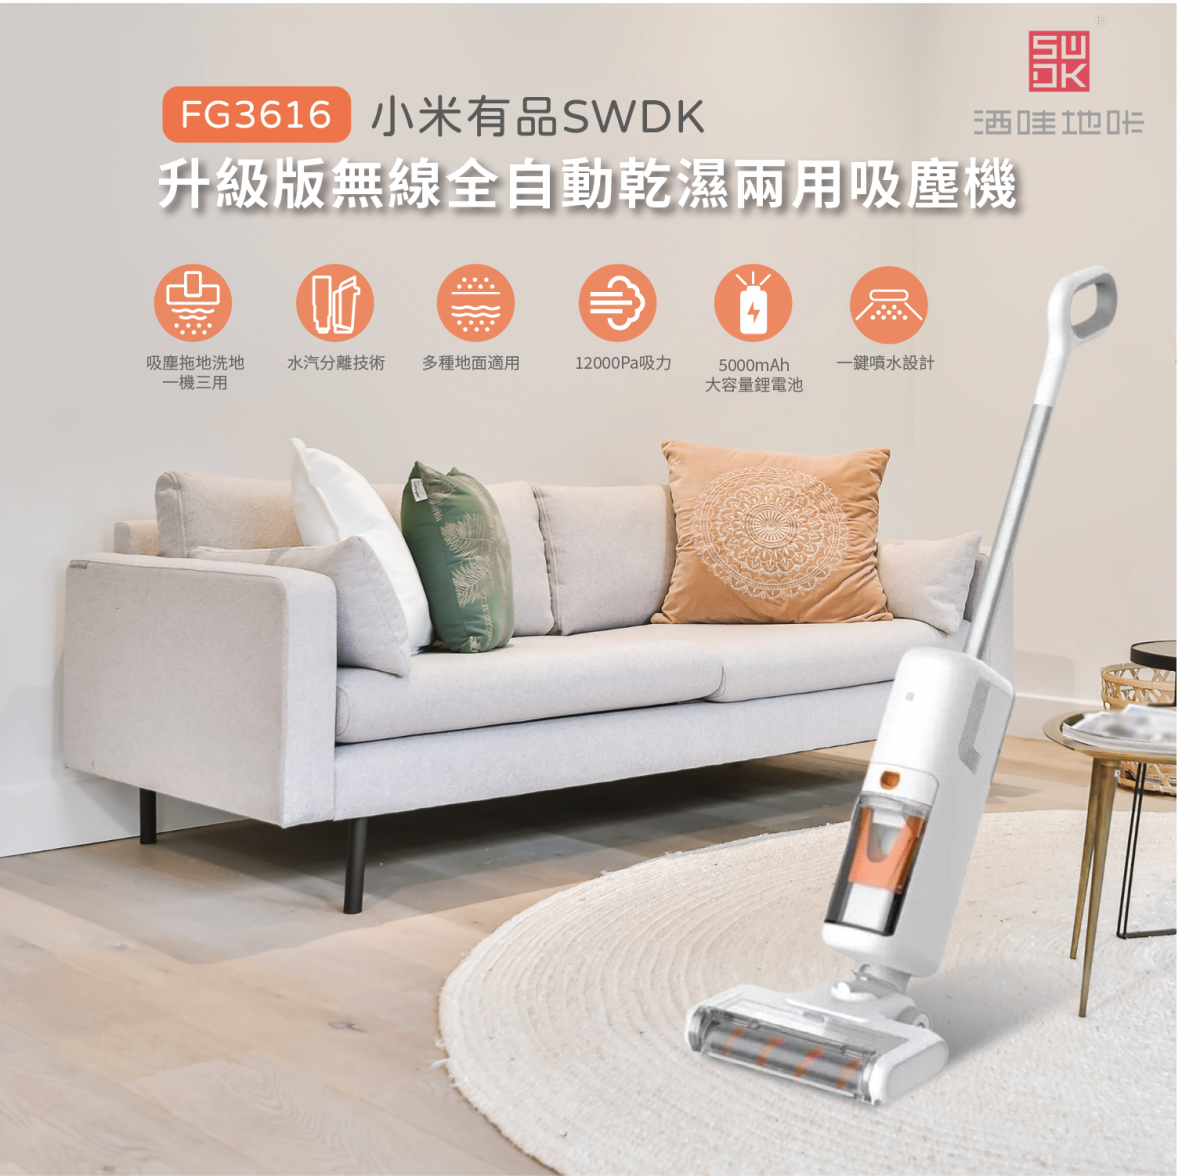 SWDK FG3616 Wireless Automatic Dry and Wet Vacuum Cleaner｜Electric Mop｜Floor Cleaner｜Cordless Cleane